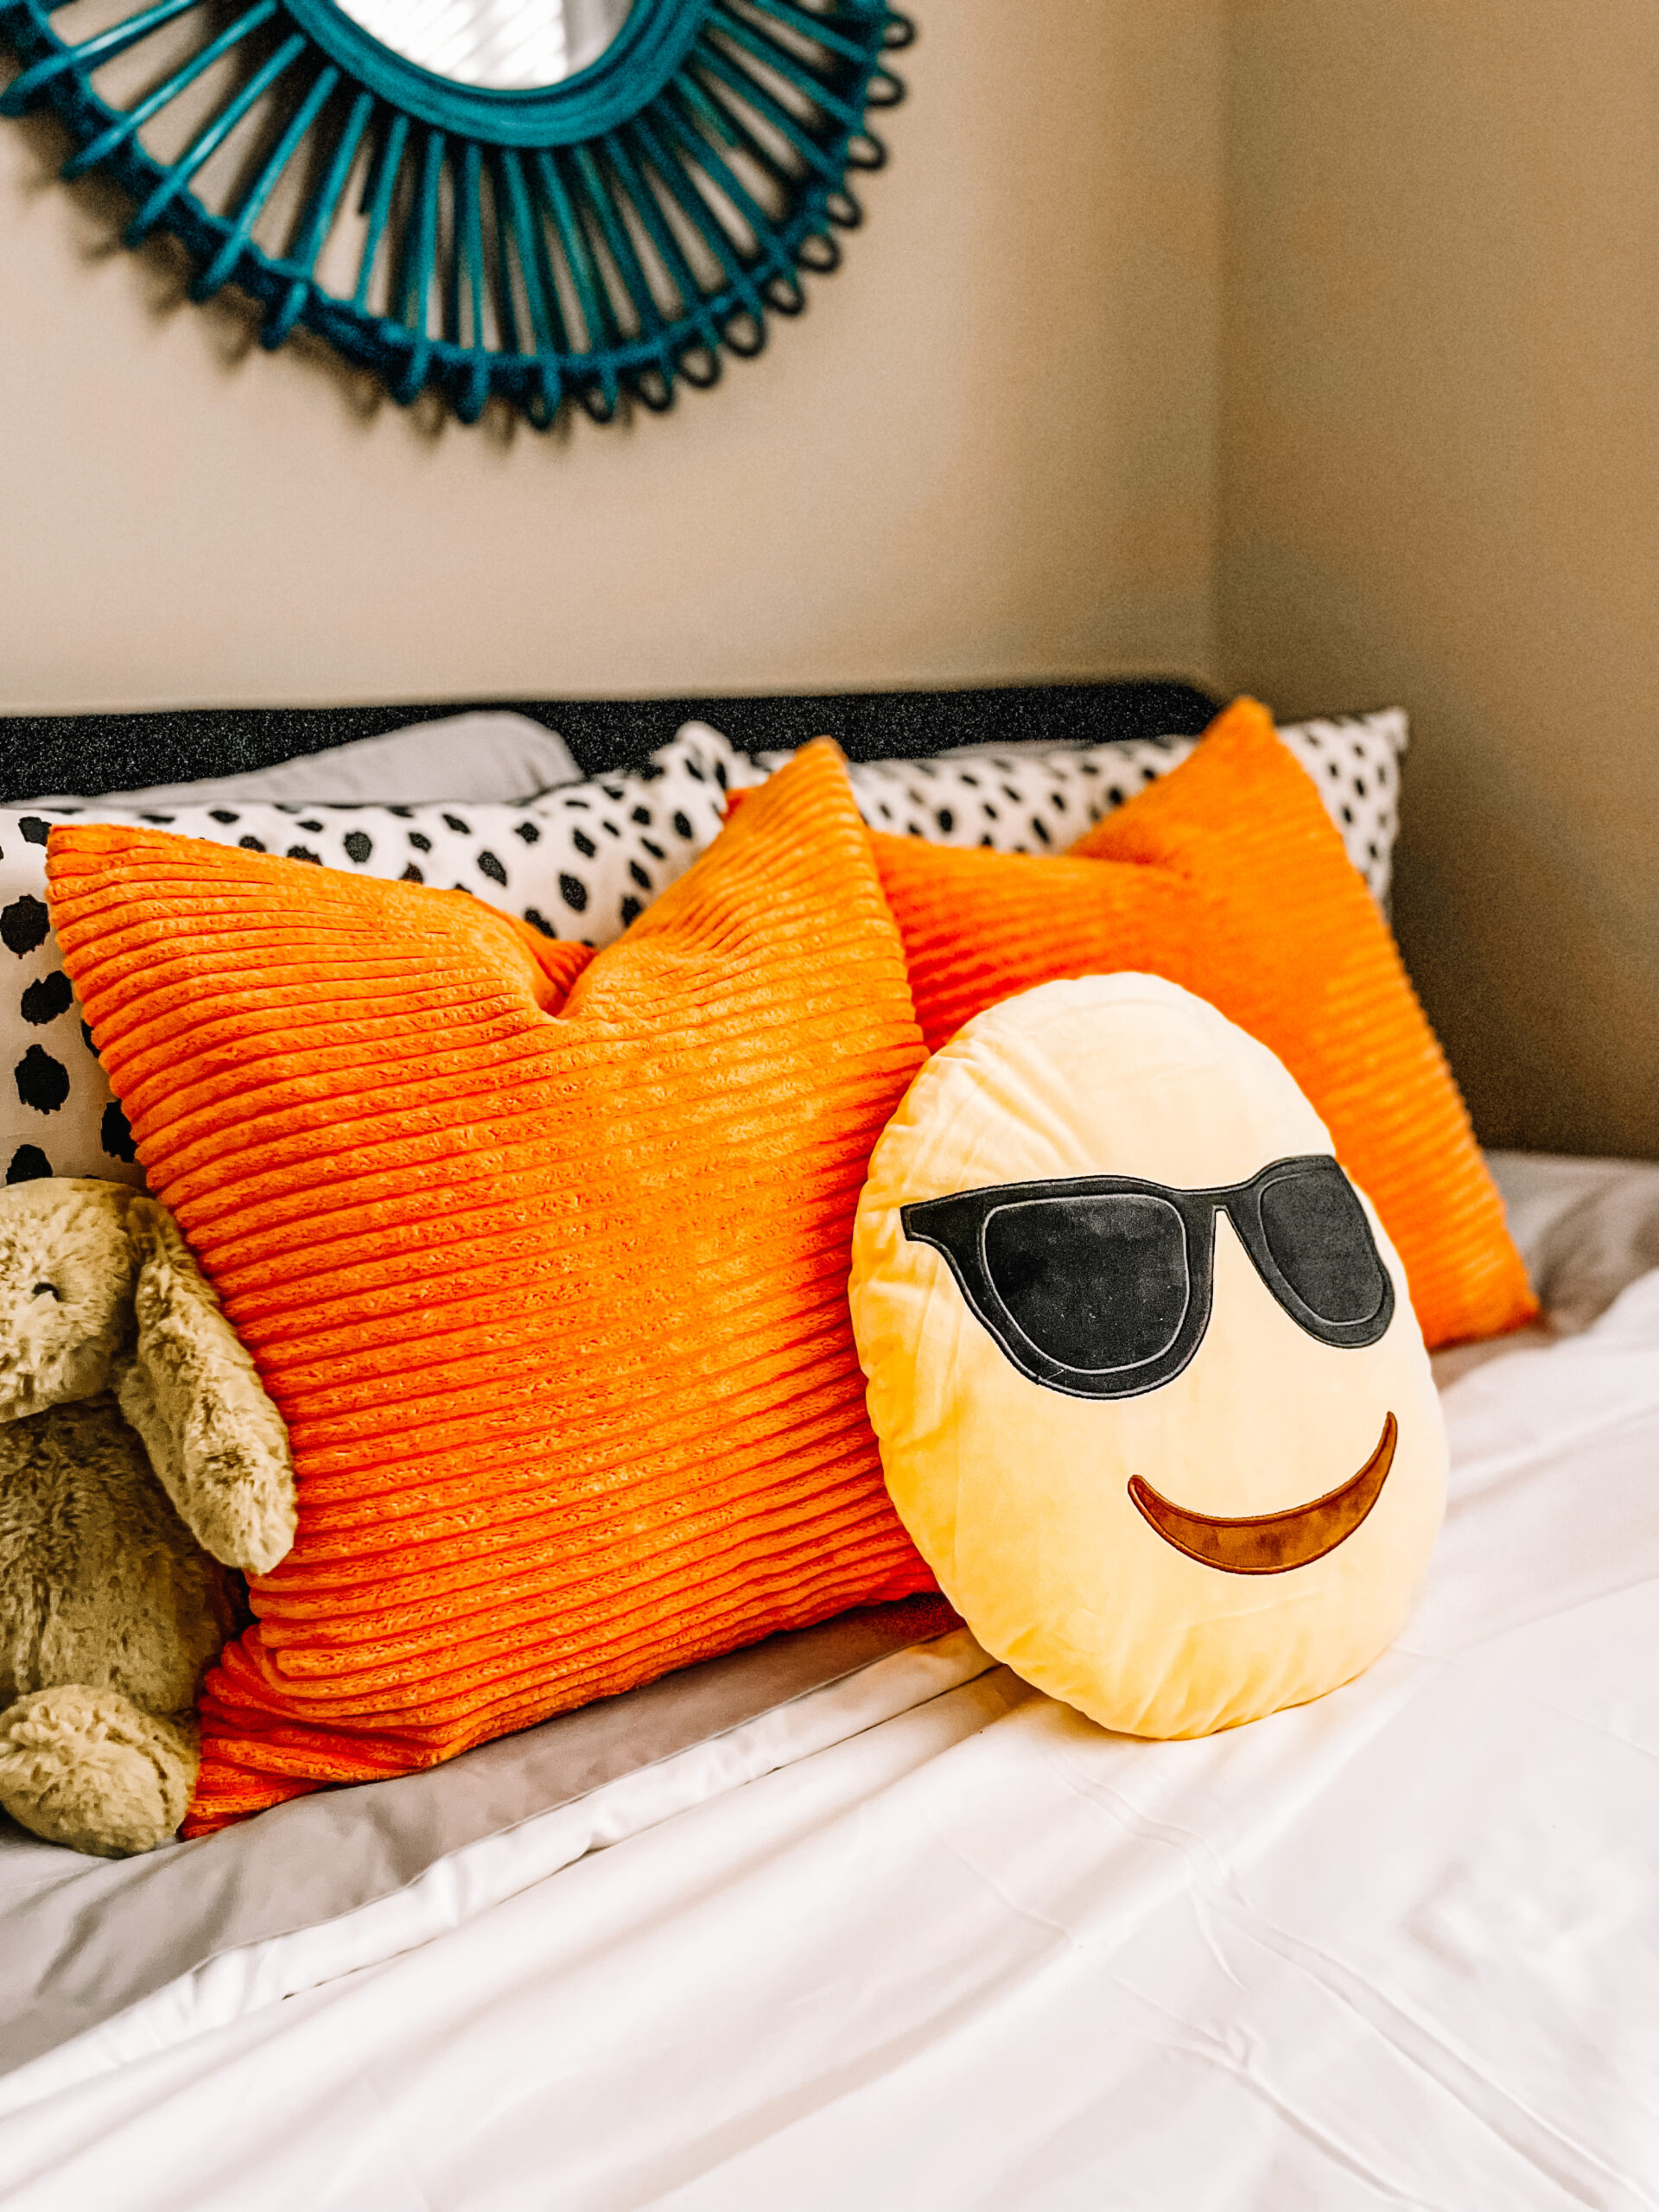 fun kid throw pillows on big boy room bed - emoji pillow orange pillows - This is our Bliss - big boy room reveal